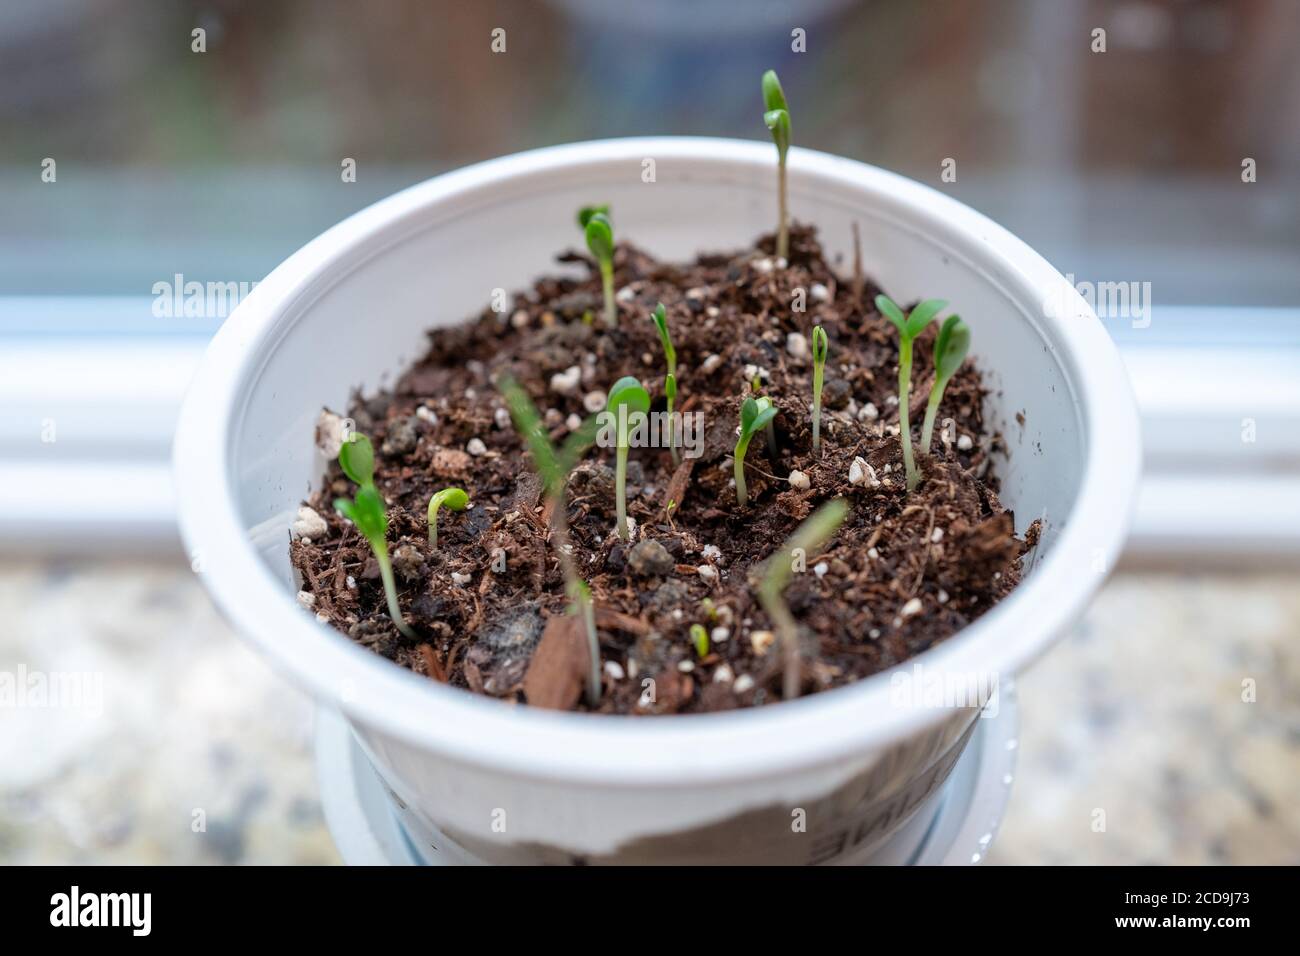 Microcup farm with plant sprouts, an example of a waste plastics reuse product from Annie's Homegrown food company, San Ramon, California, May 23, 2020. () Stock Photo